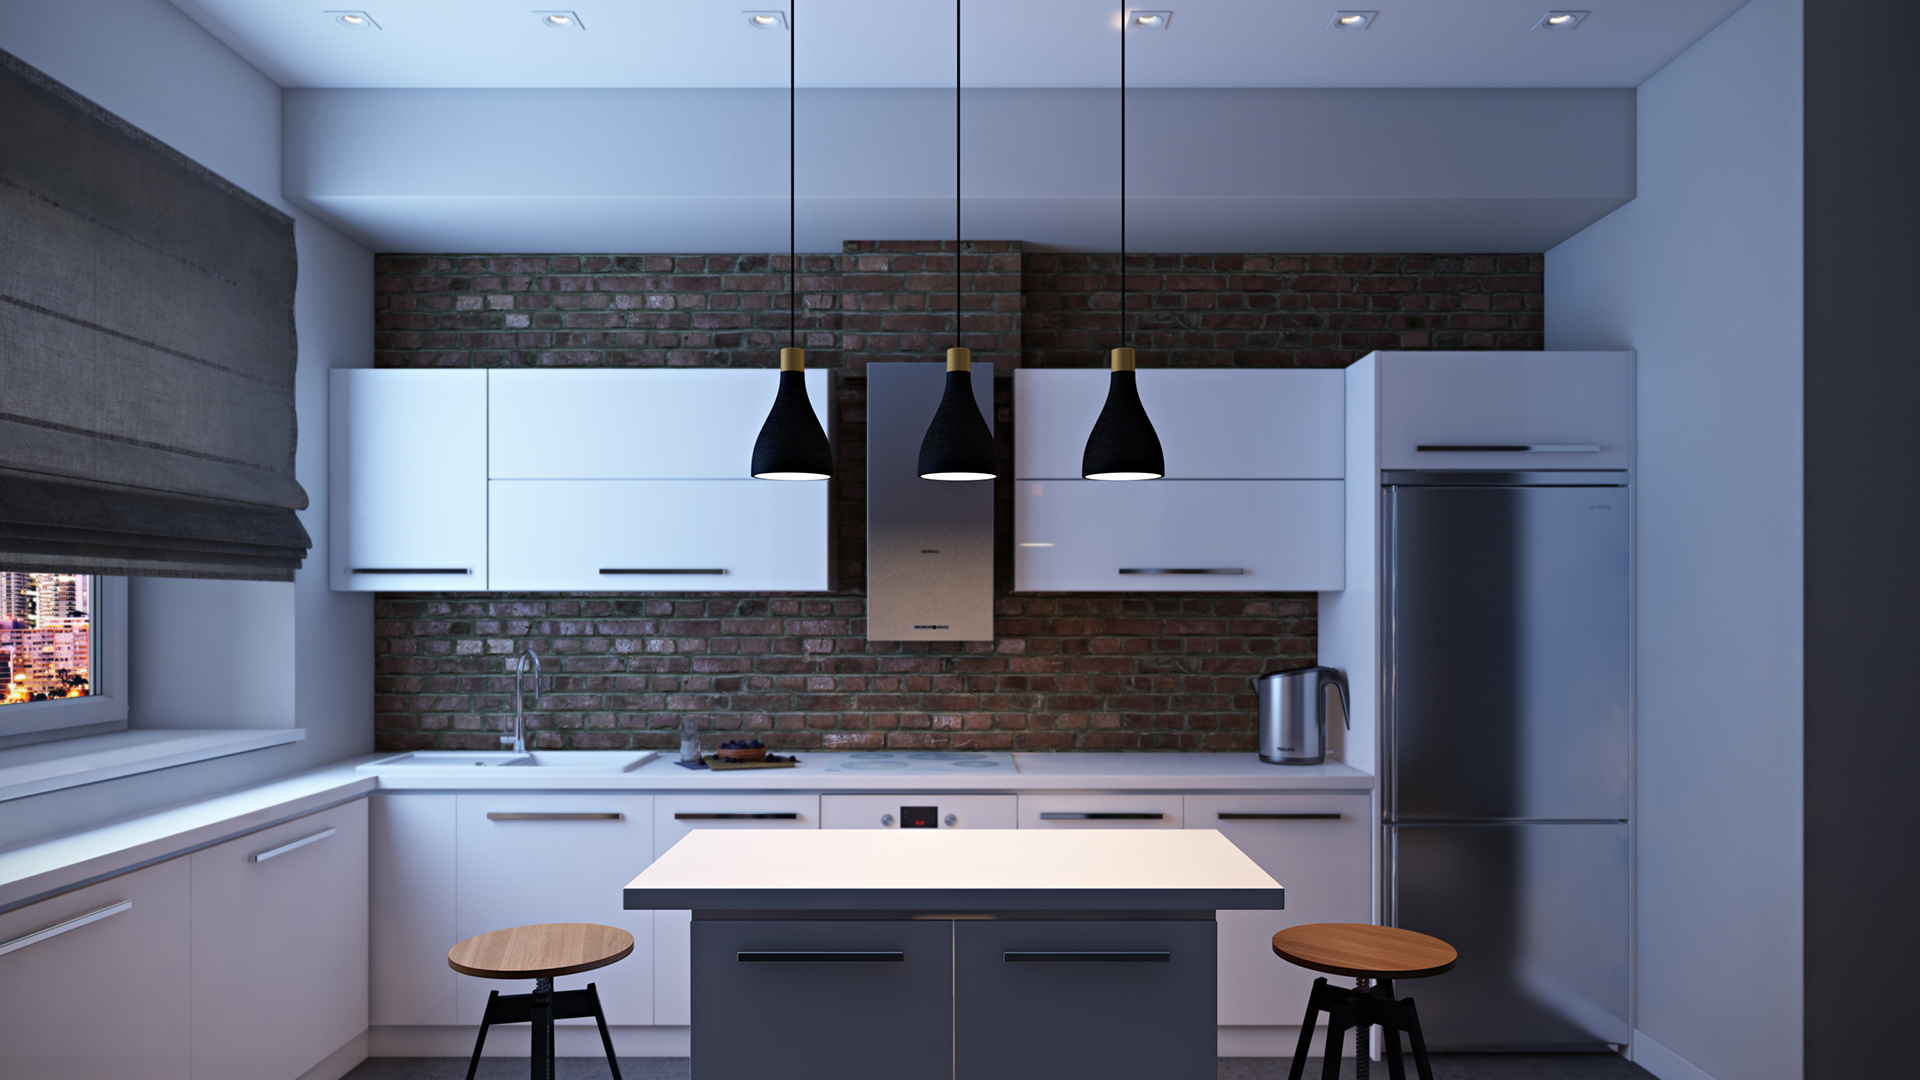 Kitchen Lifestyle CG Rendering for a Suspended Lamp